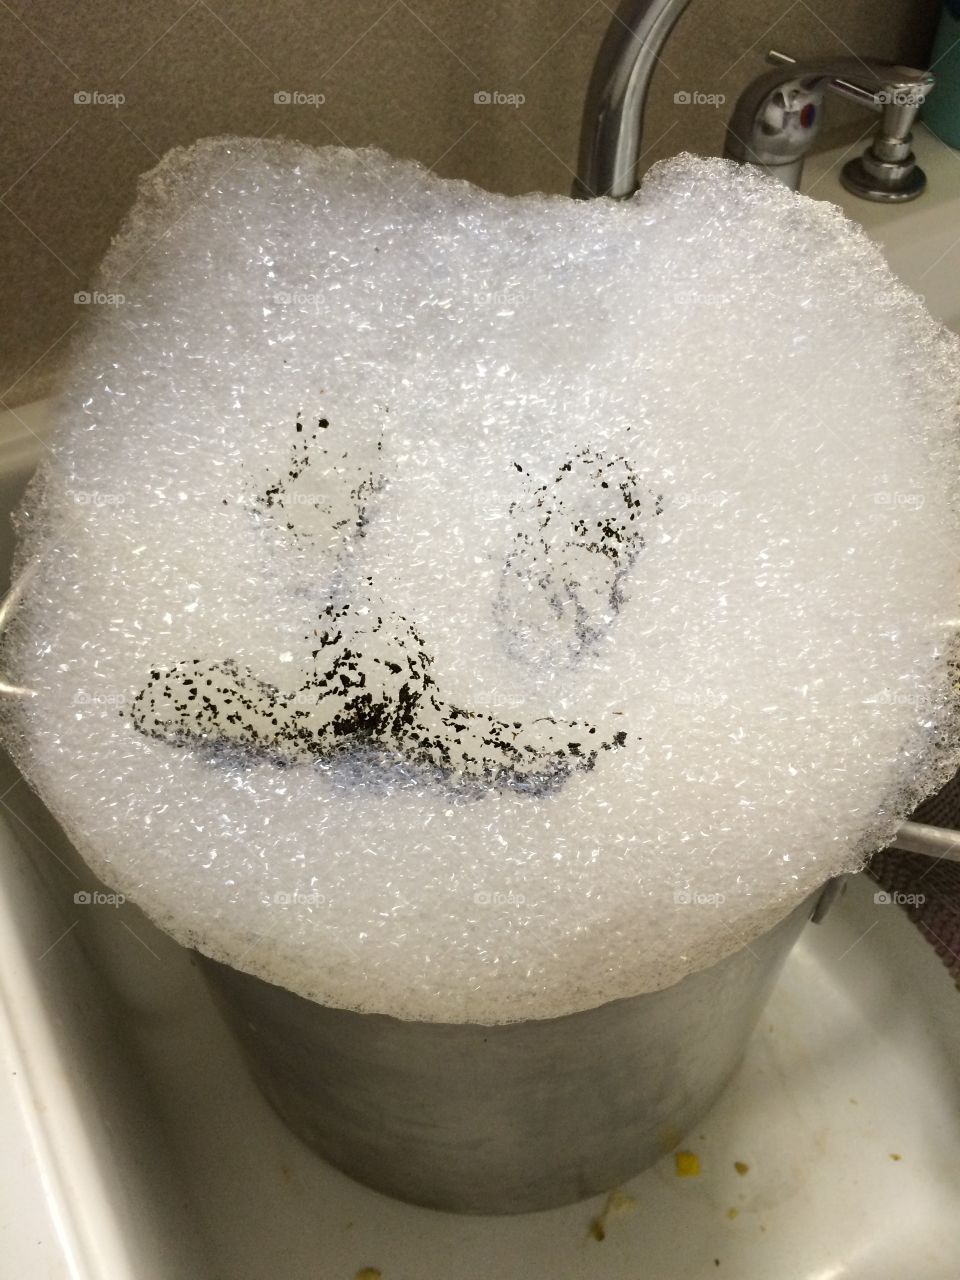 Kitty Suds. I made a face with coffee grounds in my bubbles